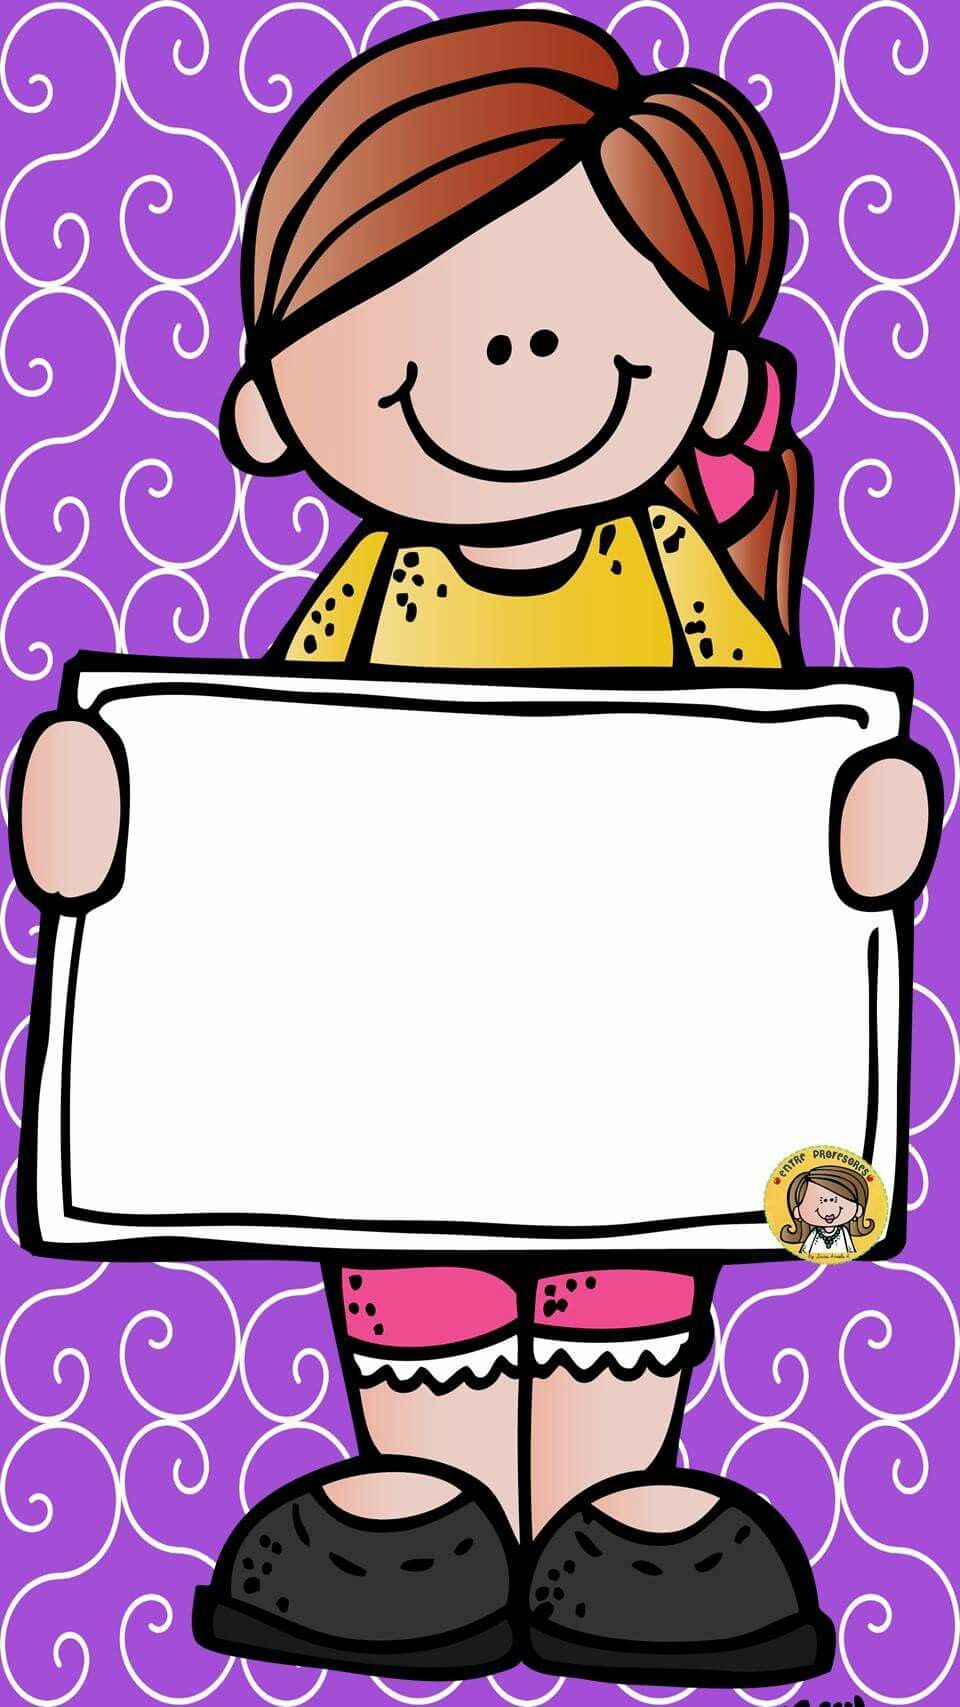 binder clipart colorful school